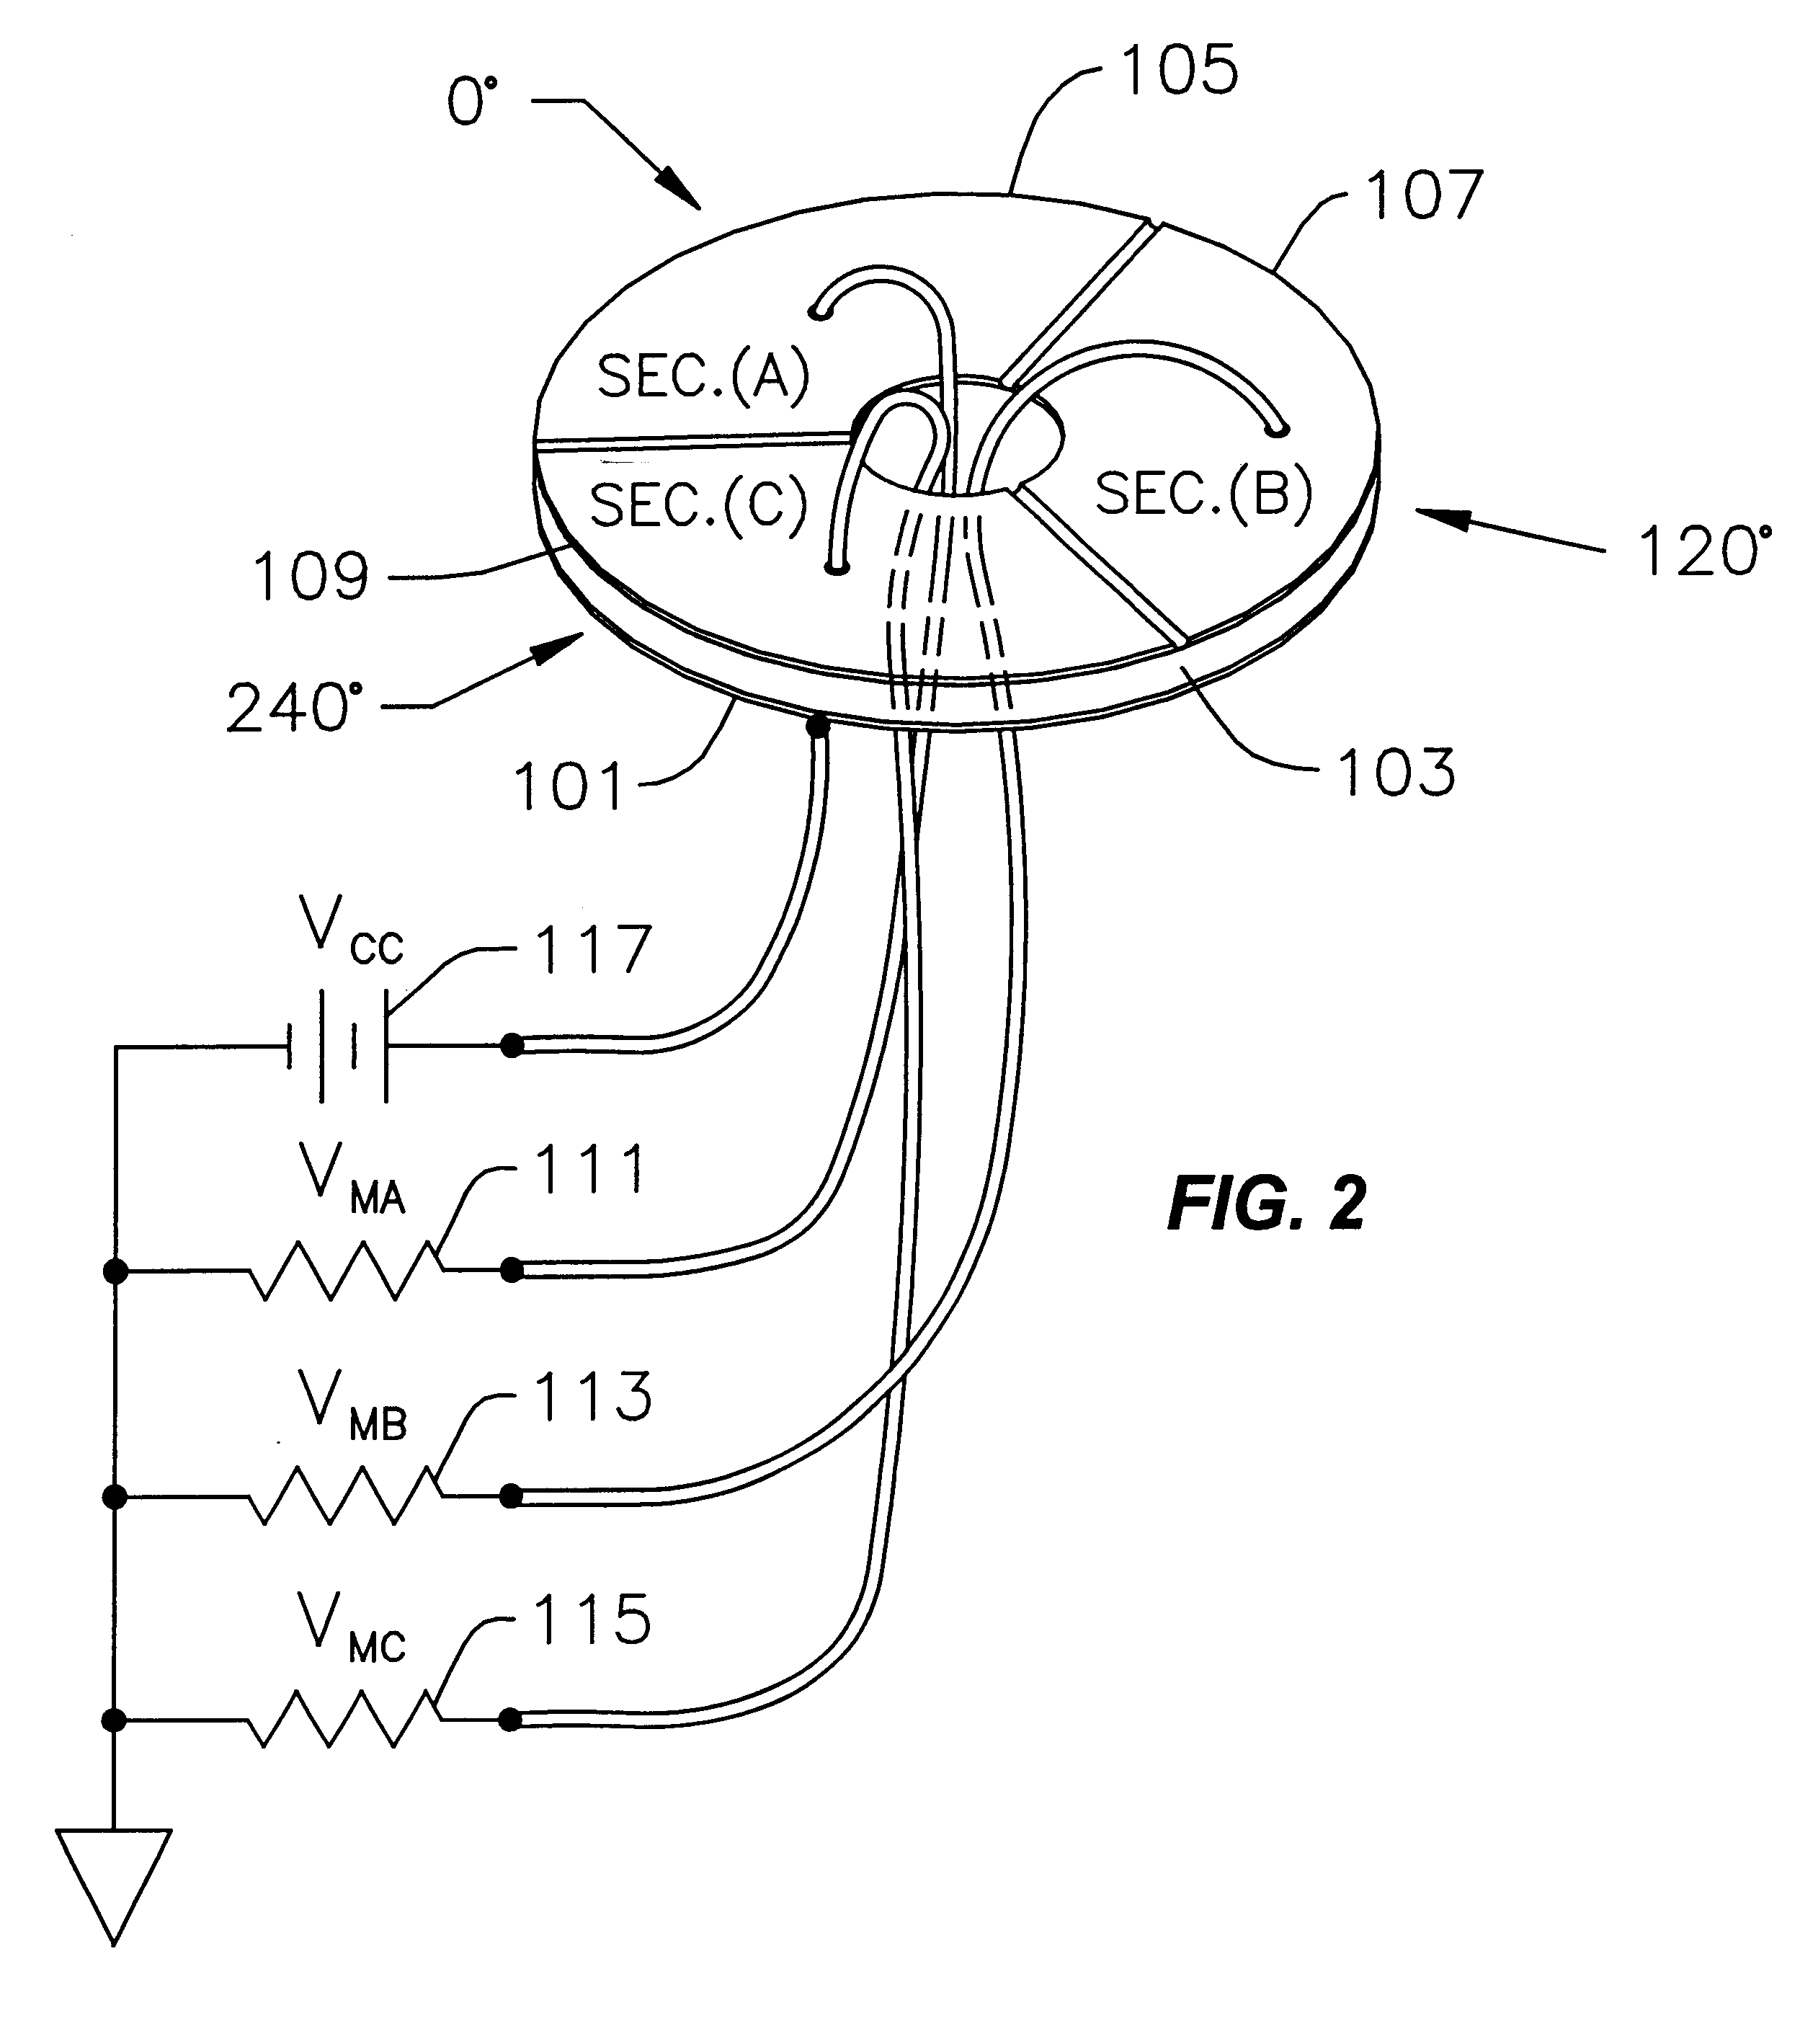 Method and apparatus for sensing and measuring plural physical properties, including temperature